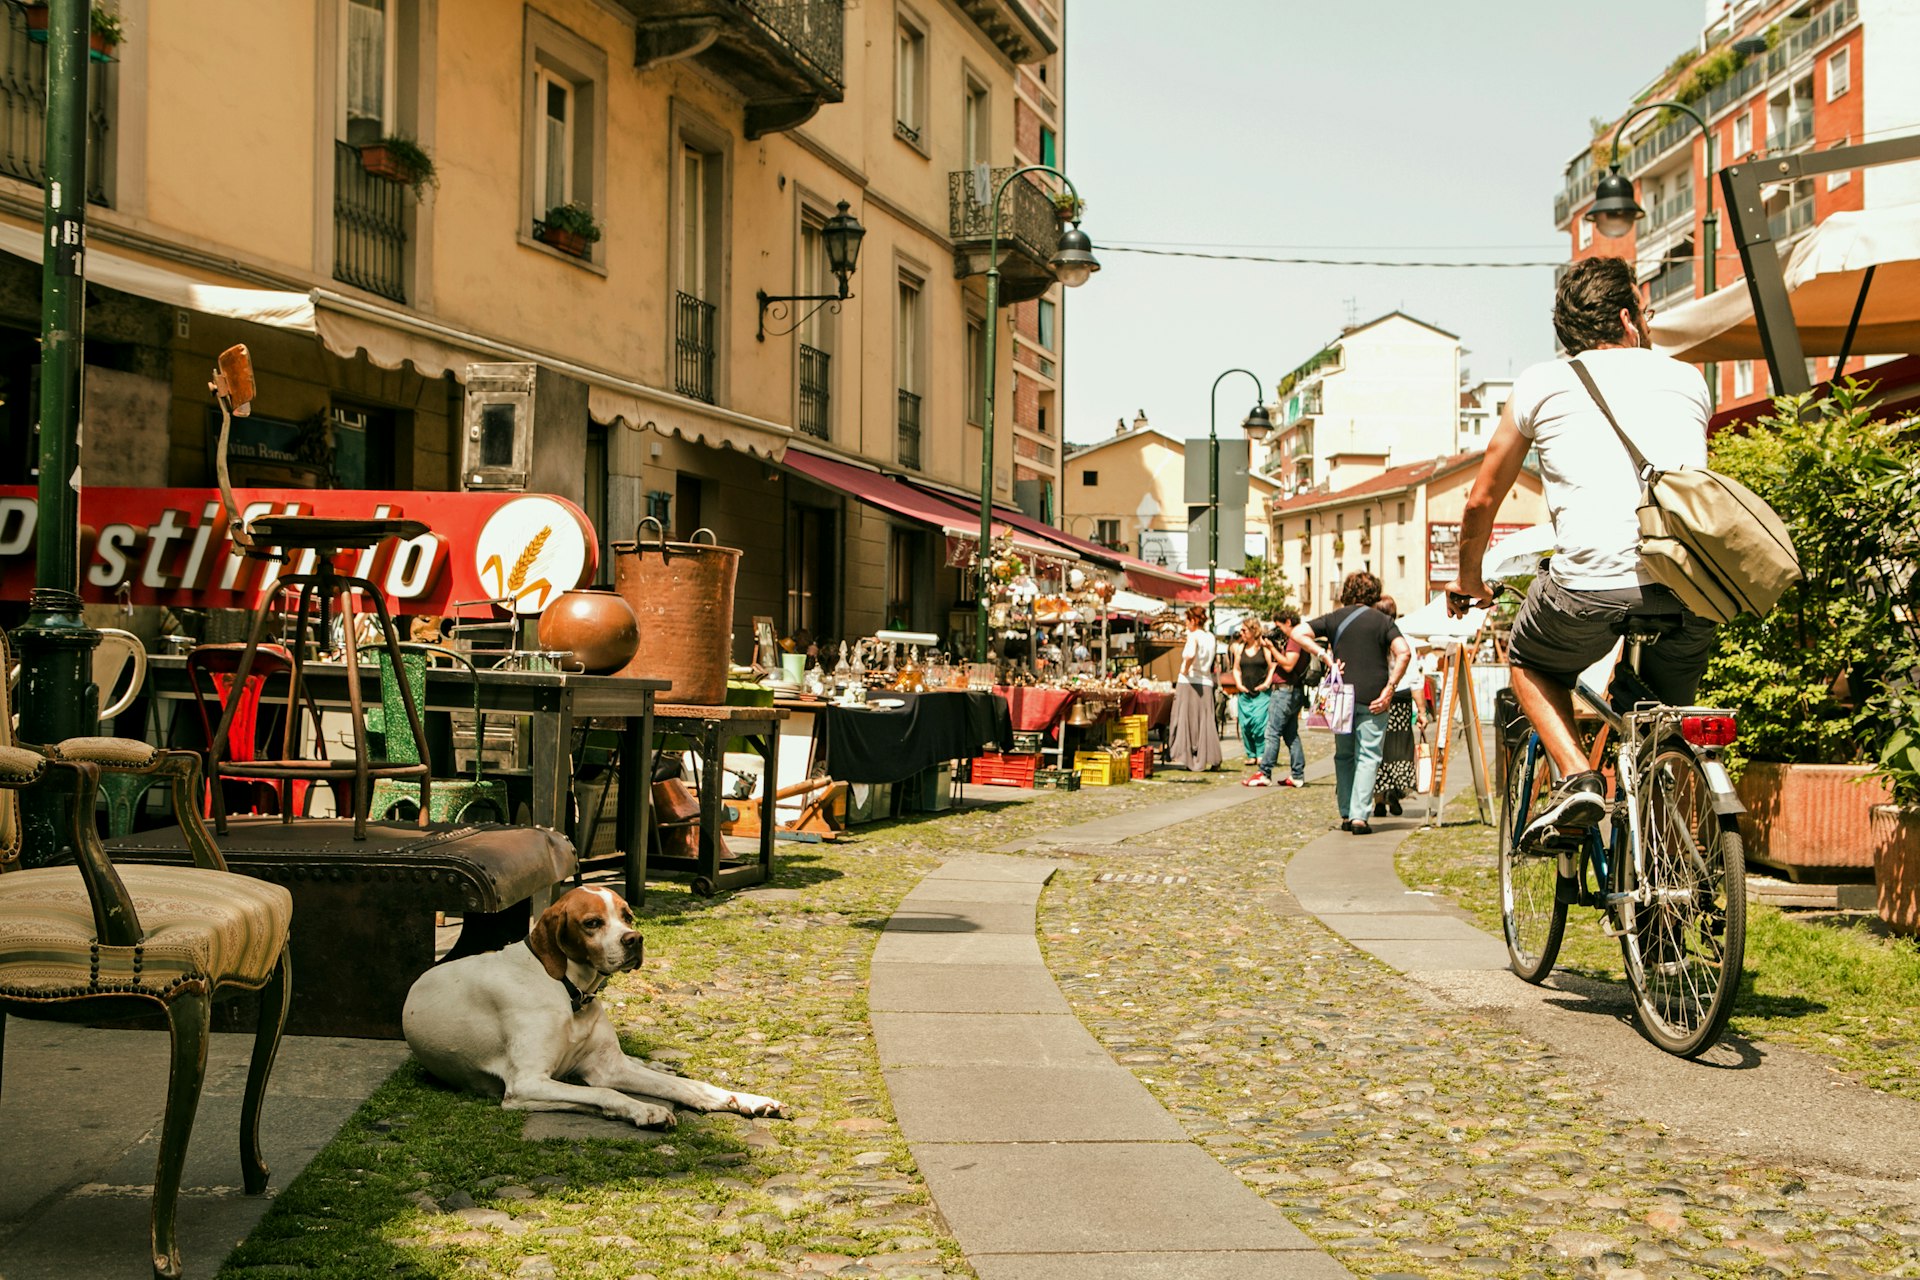 Scene of the Balon flea market in Turin with a cyclist passing through